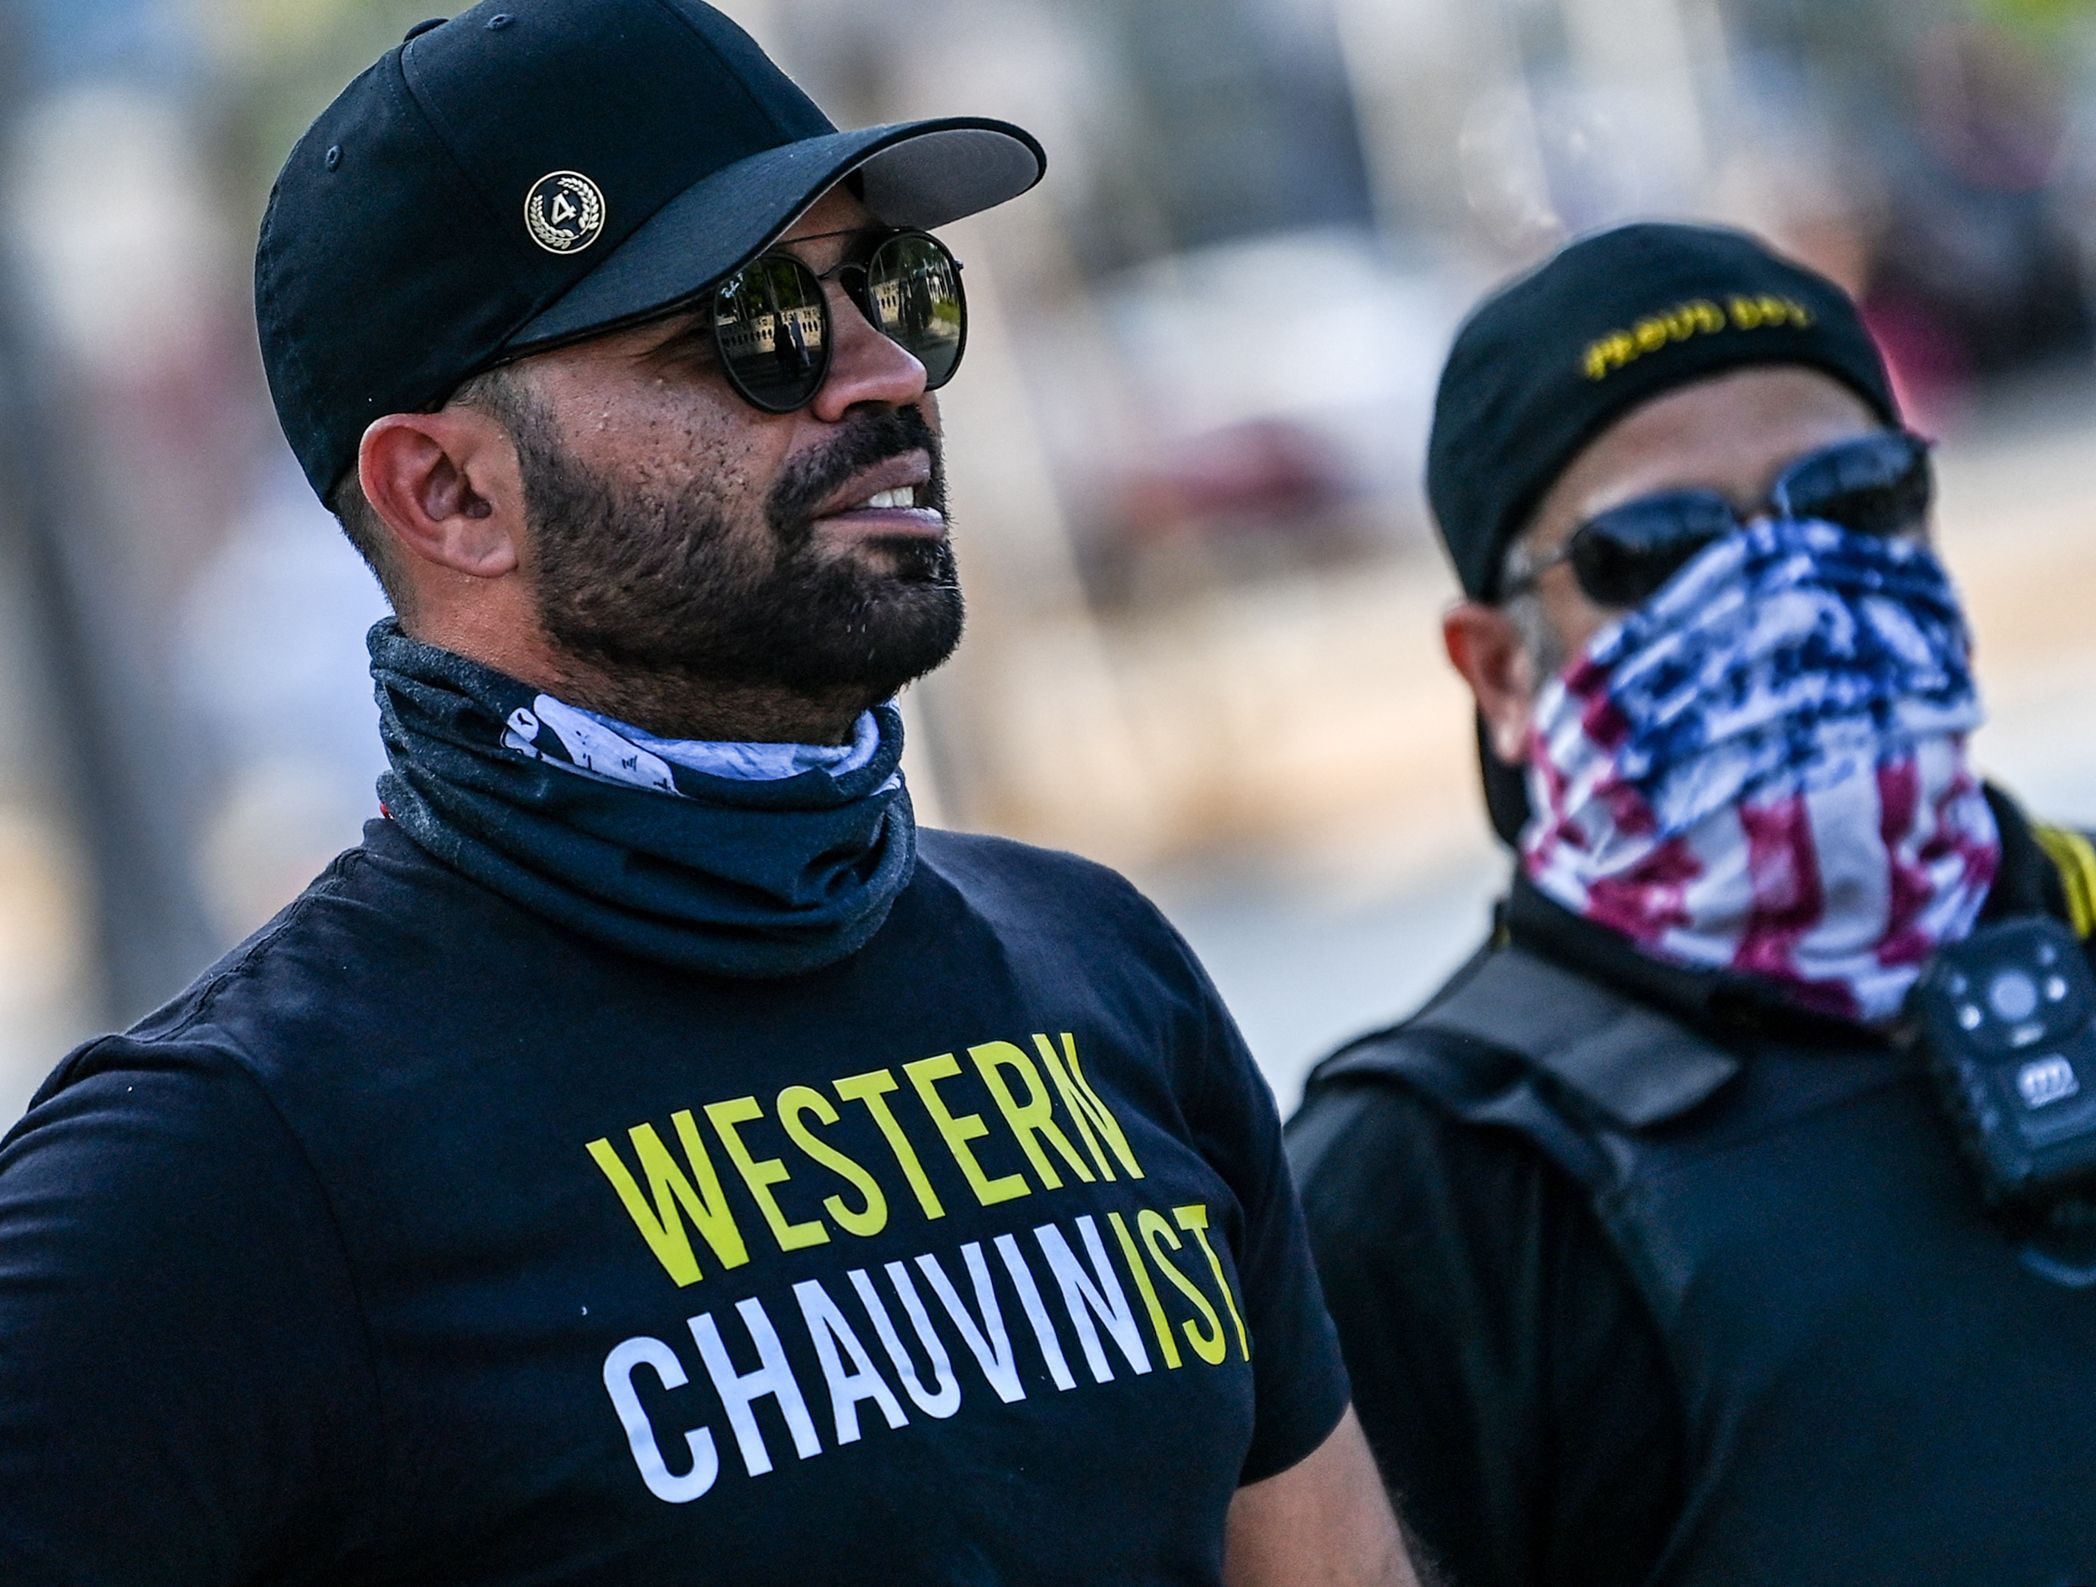 Proud Boys leader Enrique Tarrio, wearing a shirt supporting Derek Chauvin, watches protest on the one-year anniversary of his death at the hands of a police officer, in Miami.